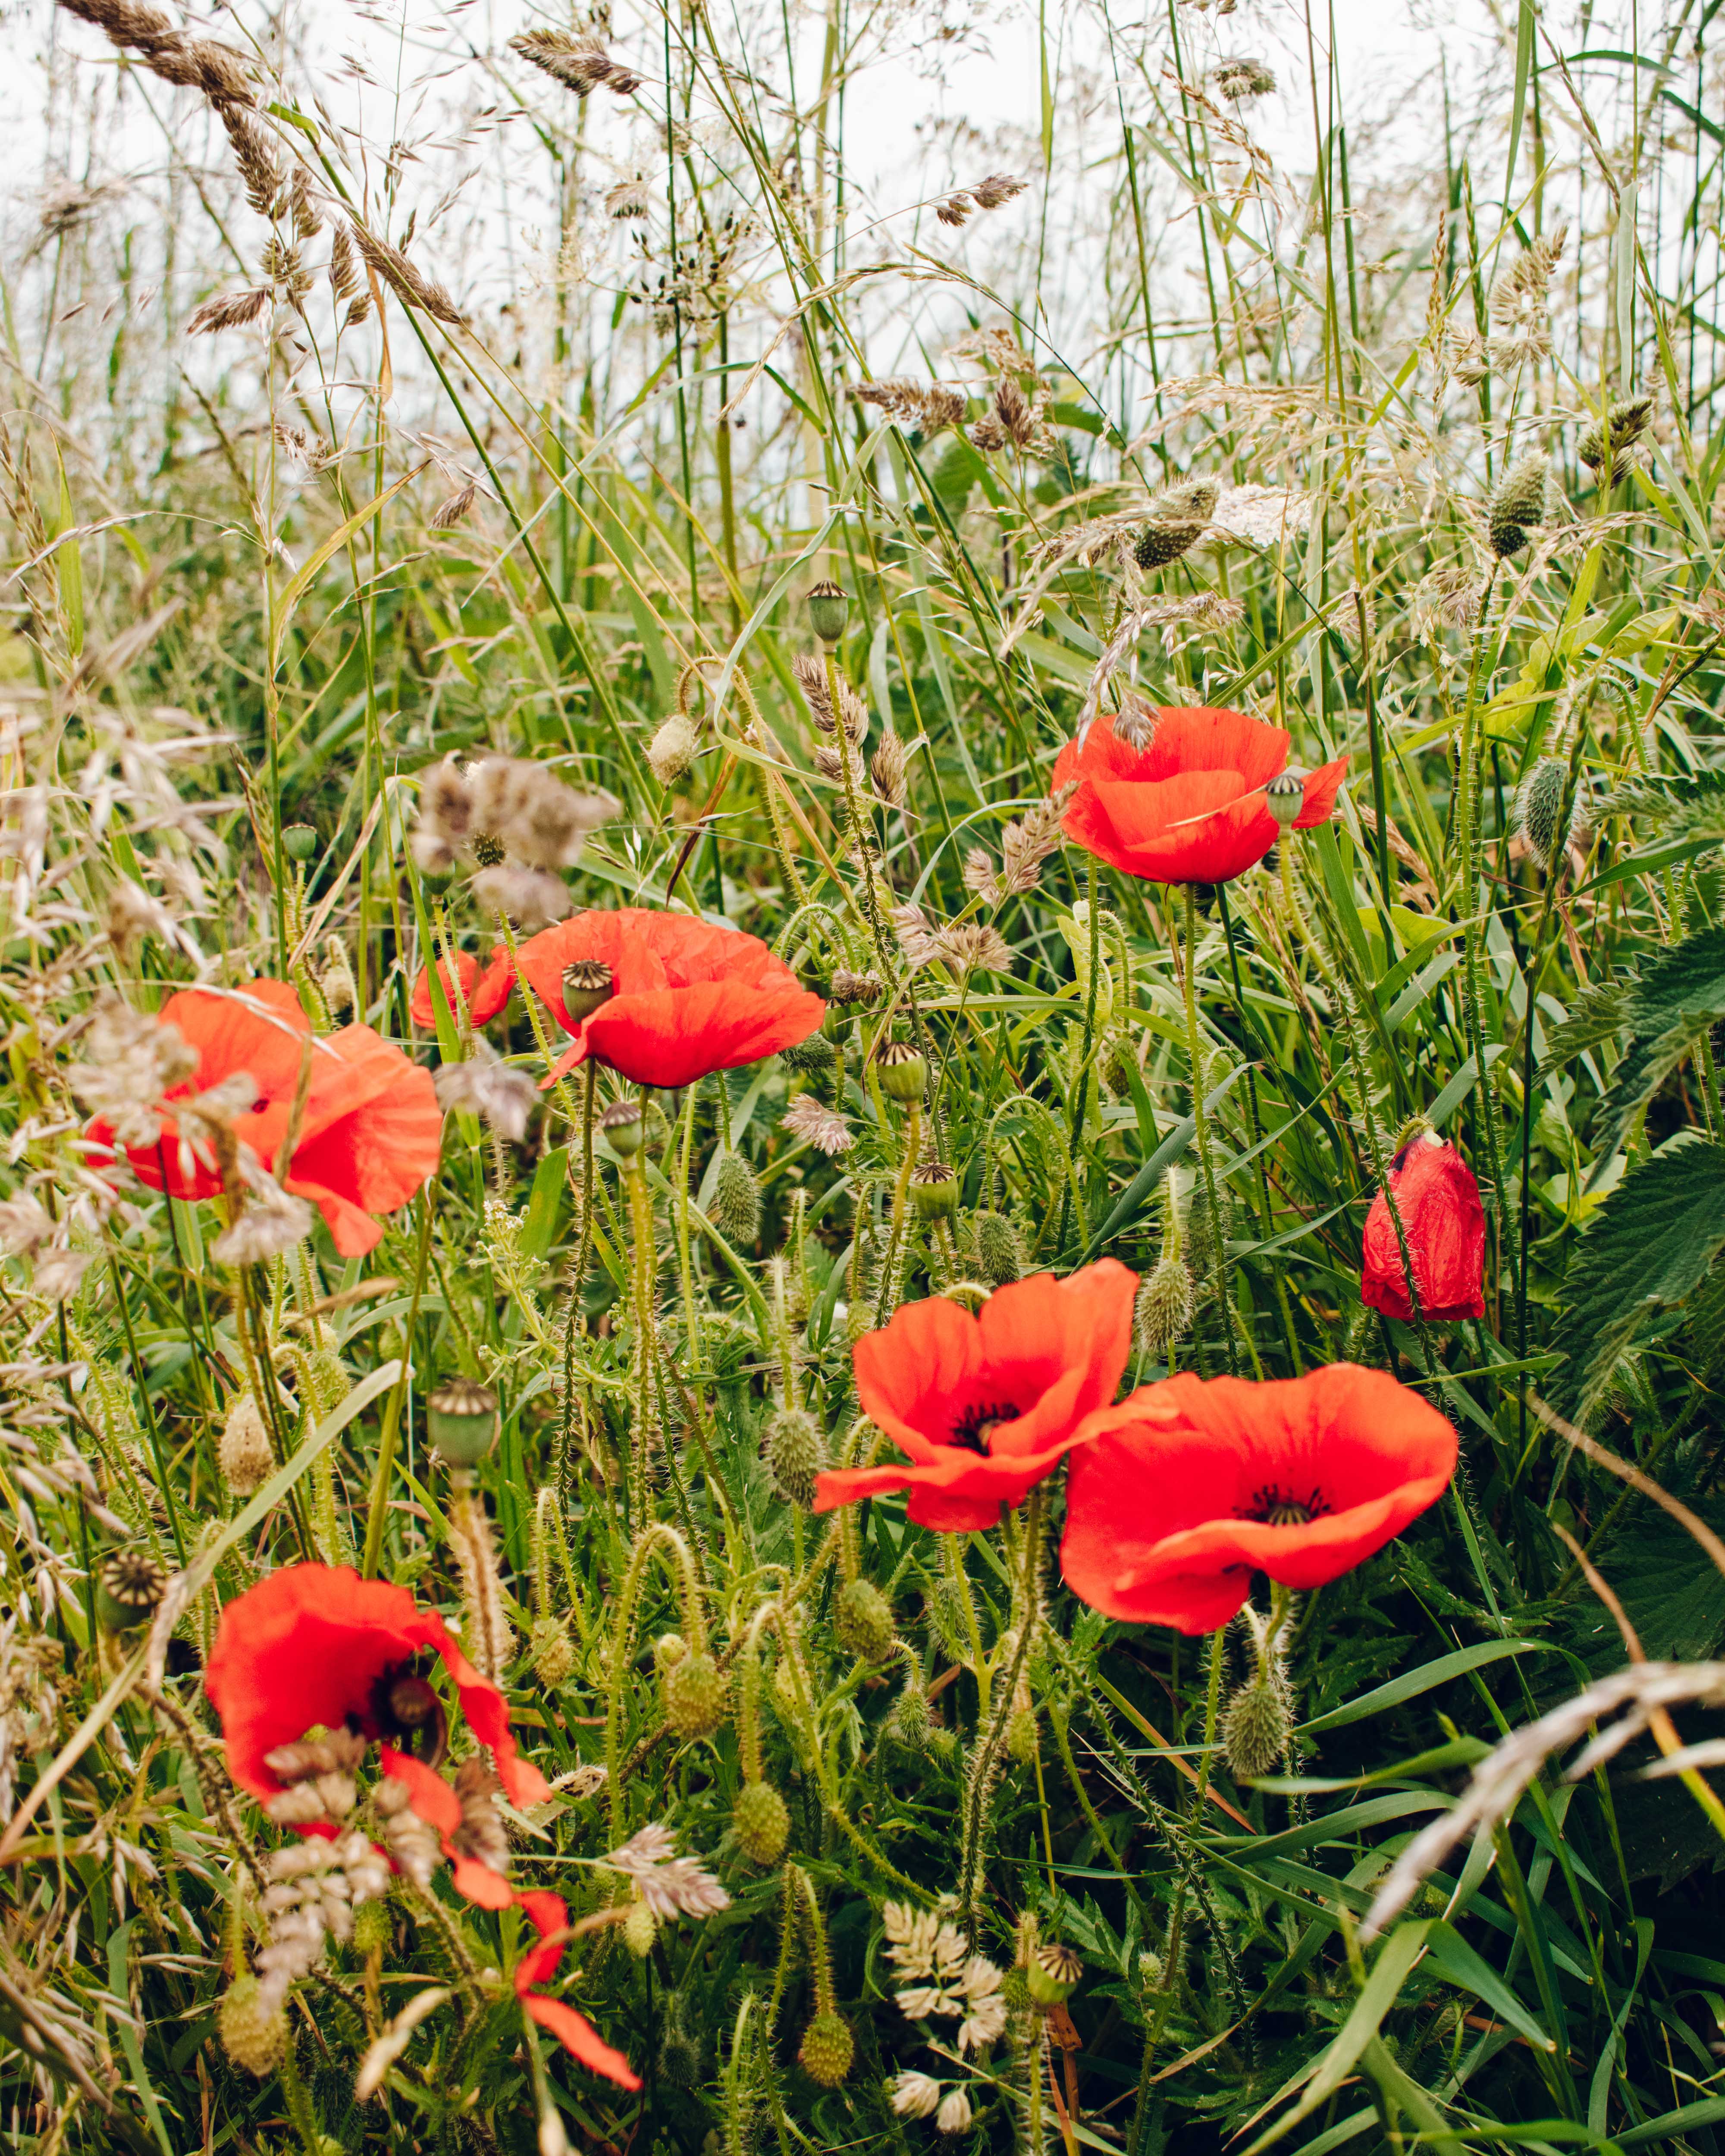 Bright red poppies growing in the verges in the Cotswolds.